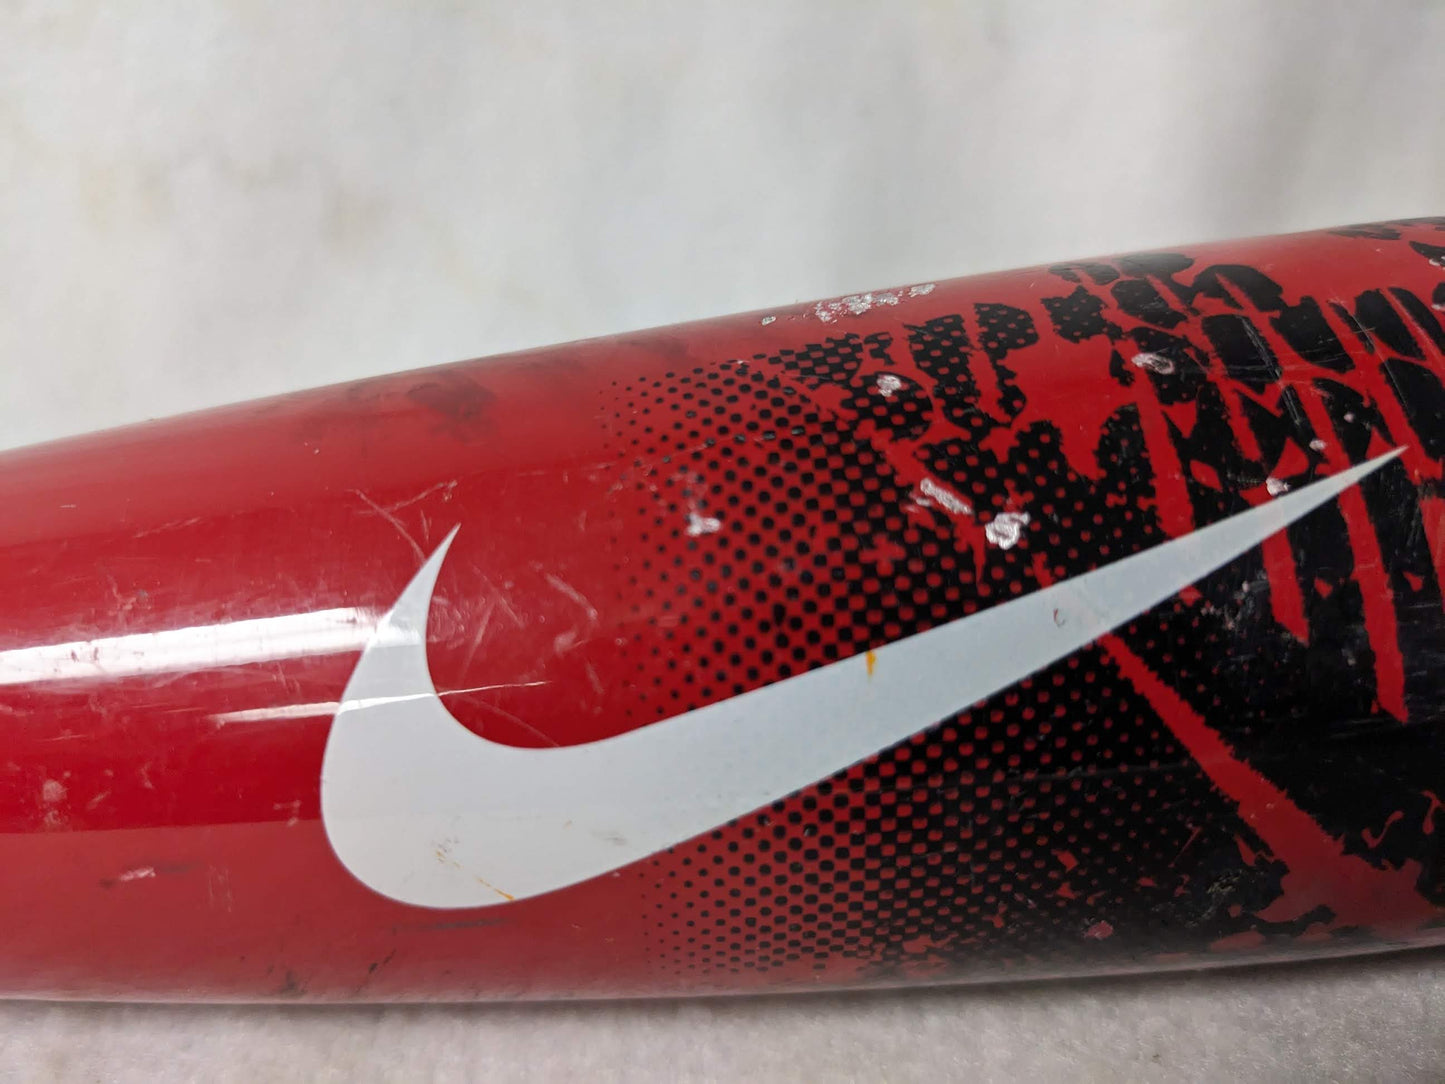 Nike Keystone T-Ball Bat Size 26 In 15 Oz Color Red Condition Used